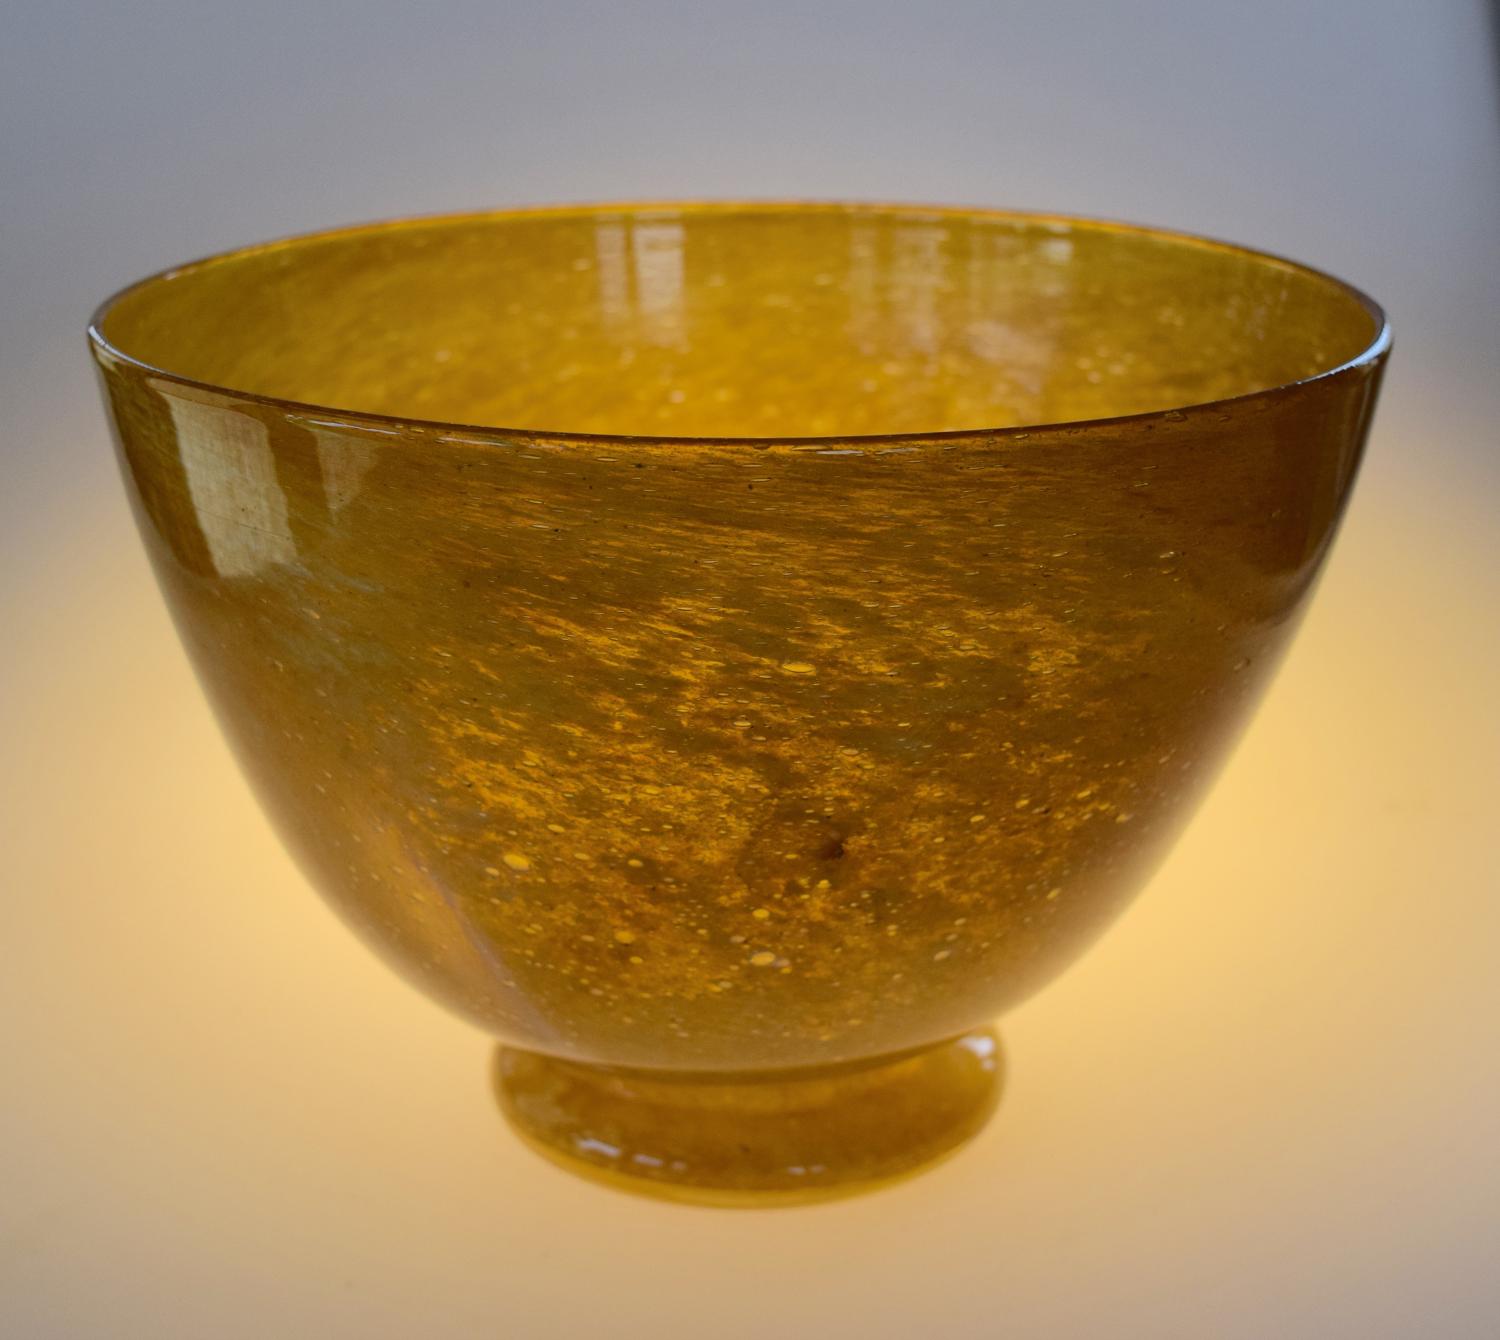 Yellow cloudy bowl, Whitefriars.